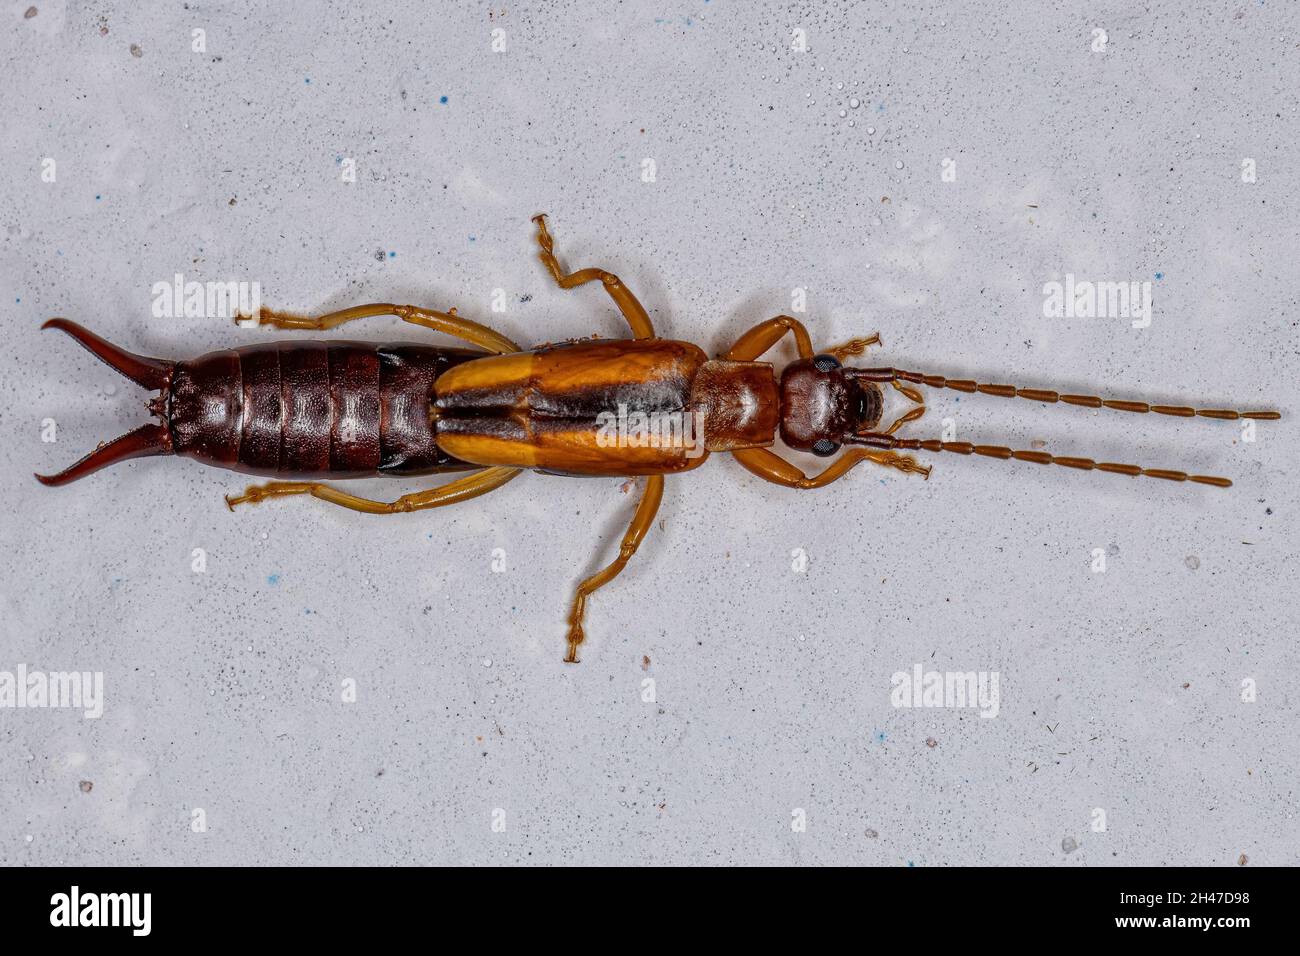 Adult Common Earwig of the Family Forficulidae Stock Photo